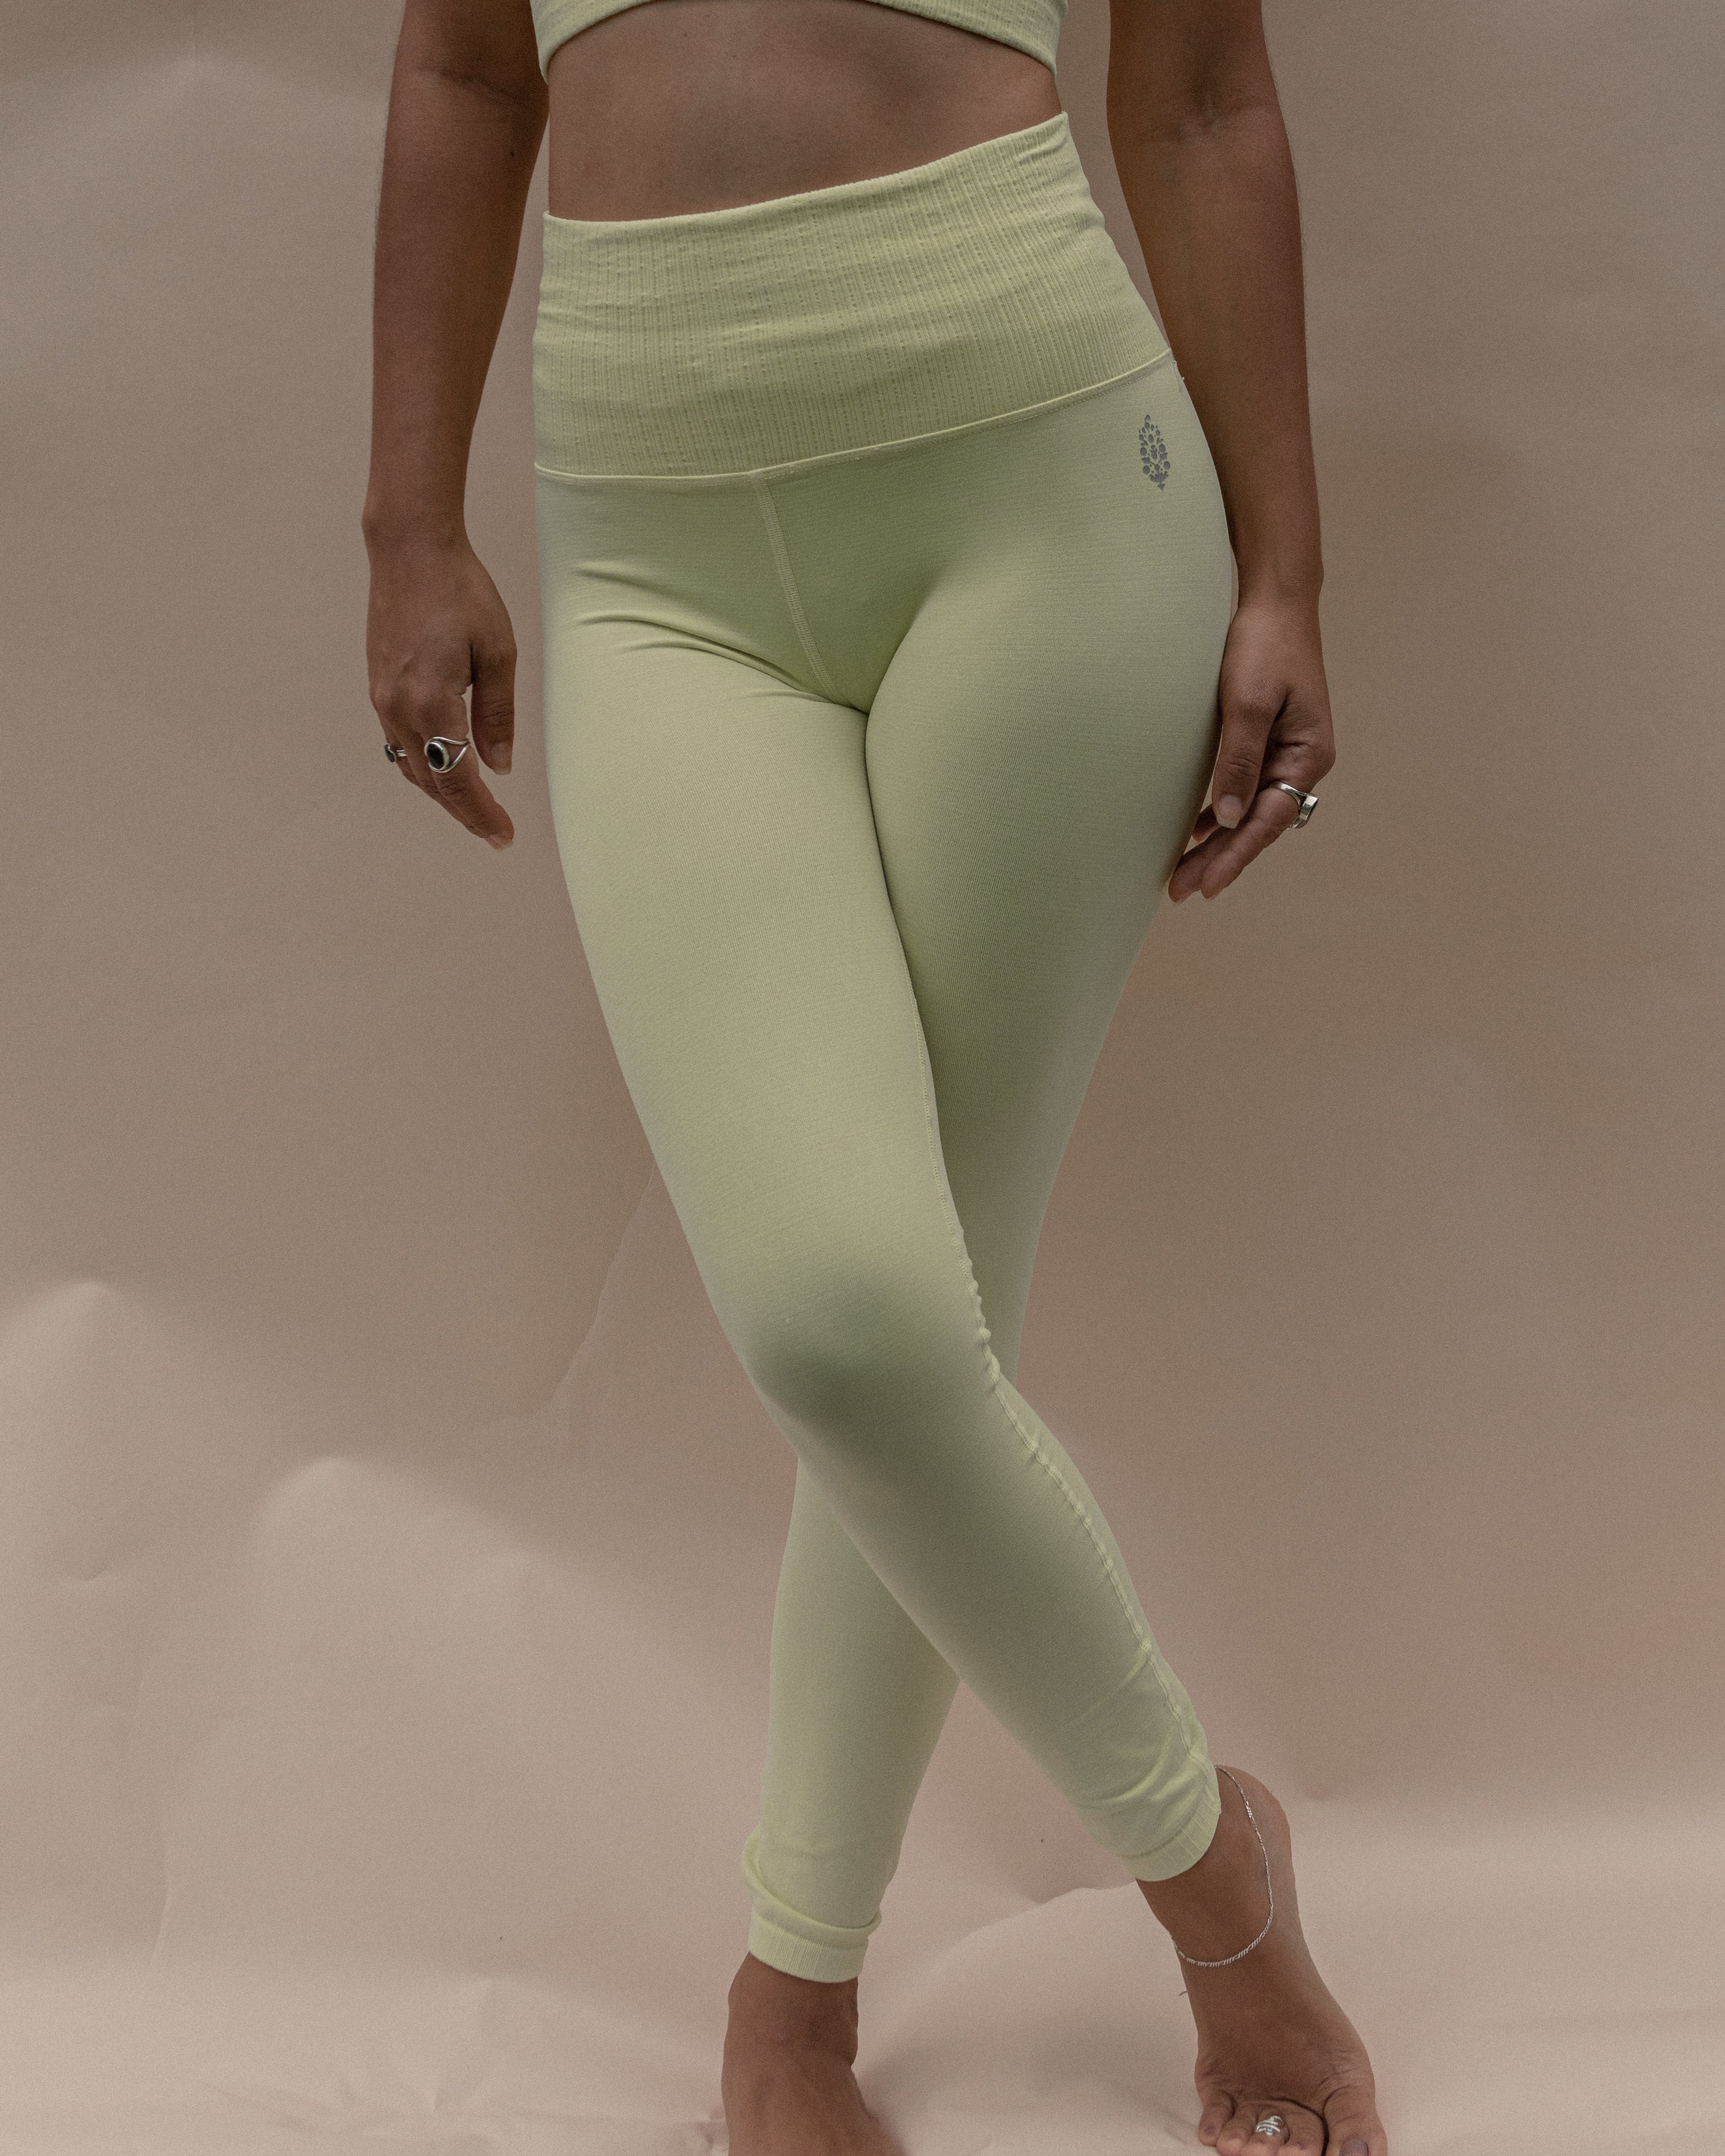 Patience & Strength Legging by FP Movement at Free People - Yoga